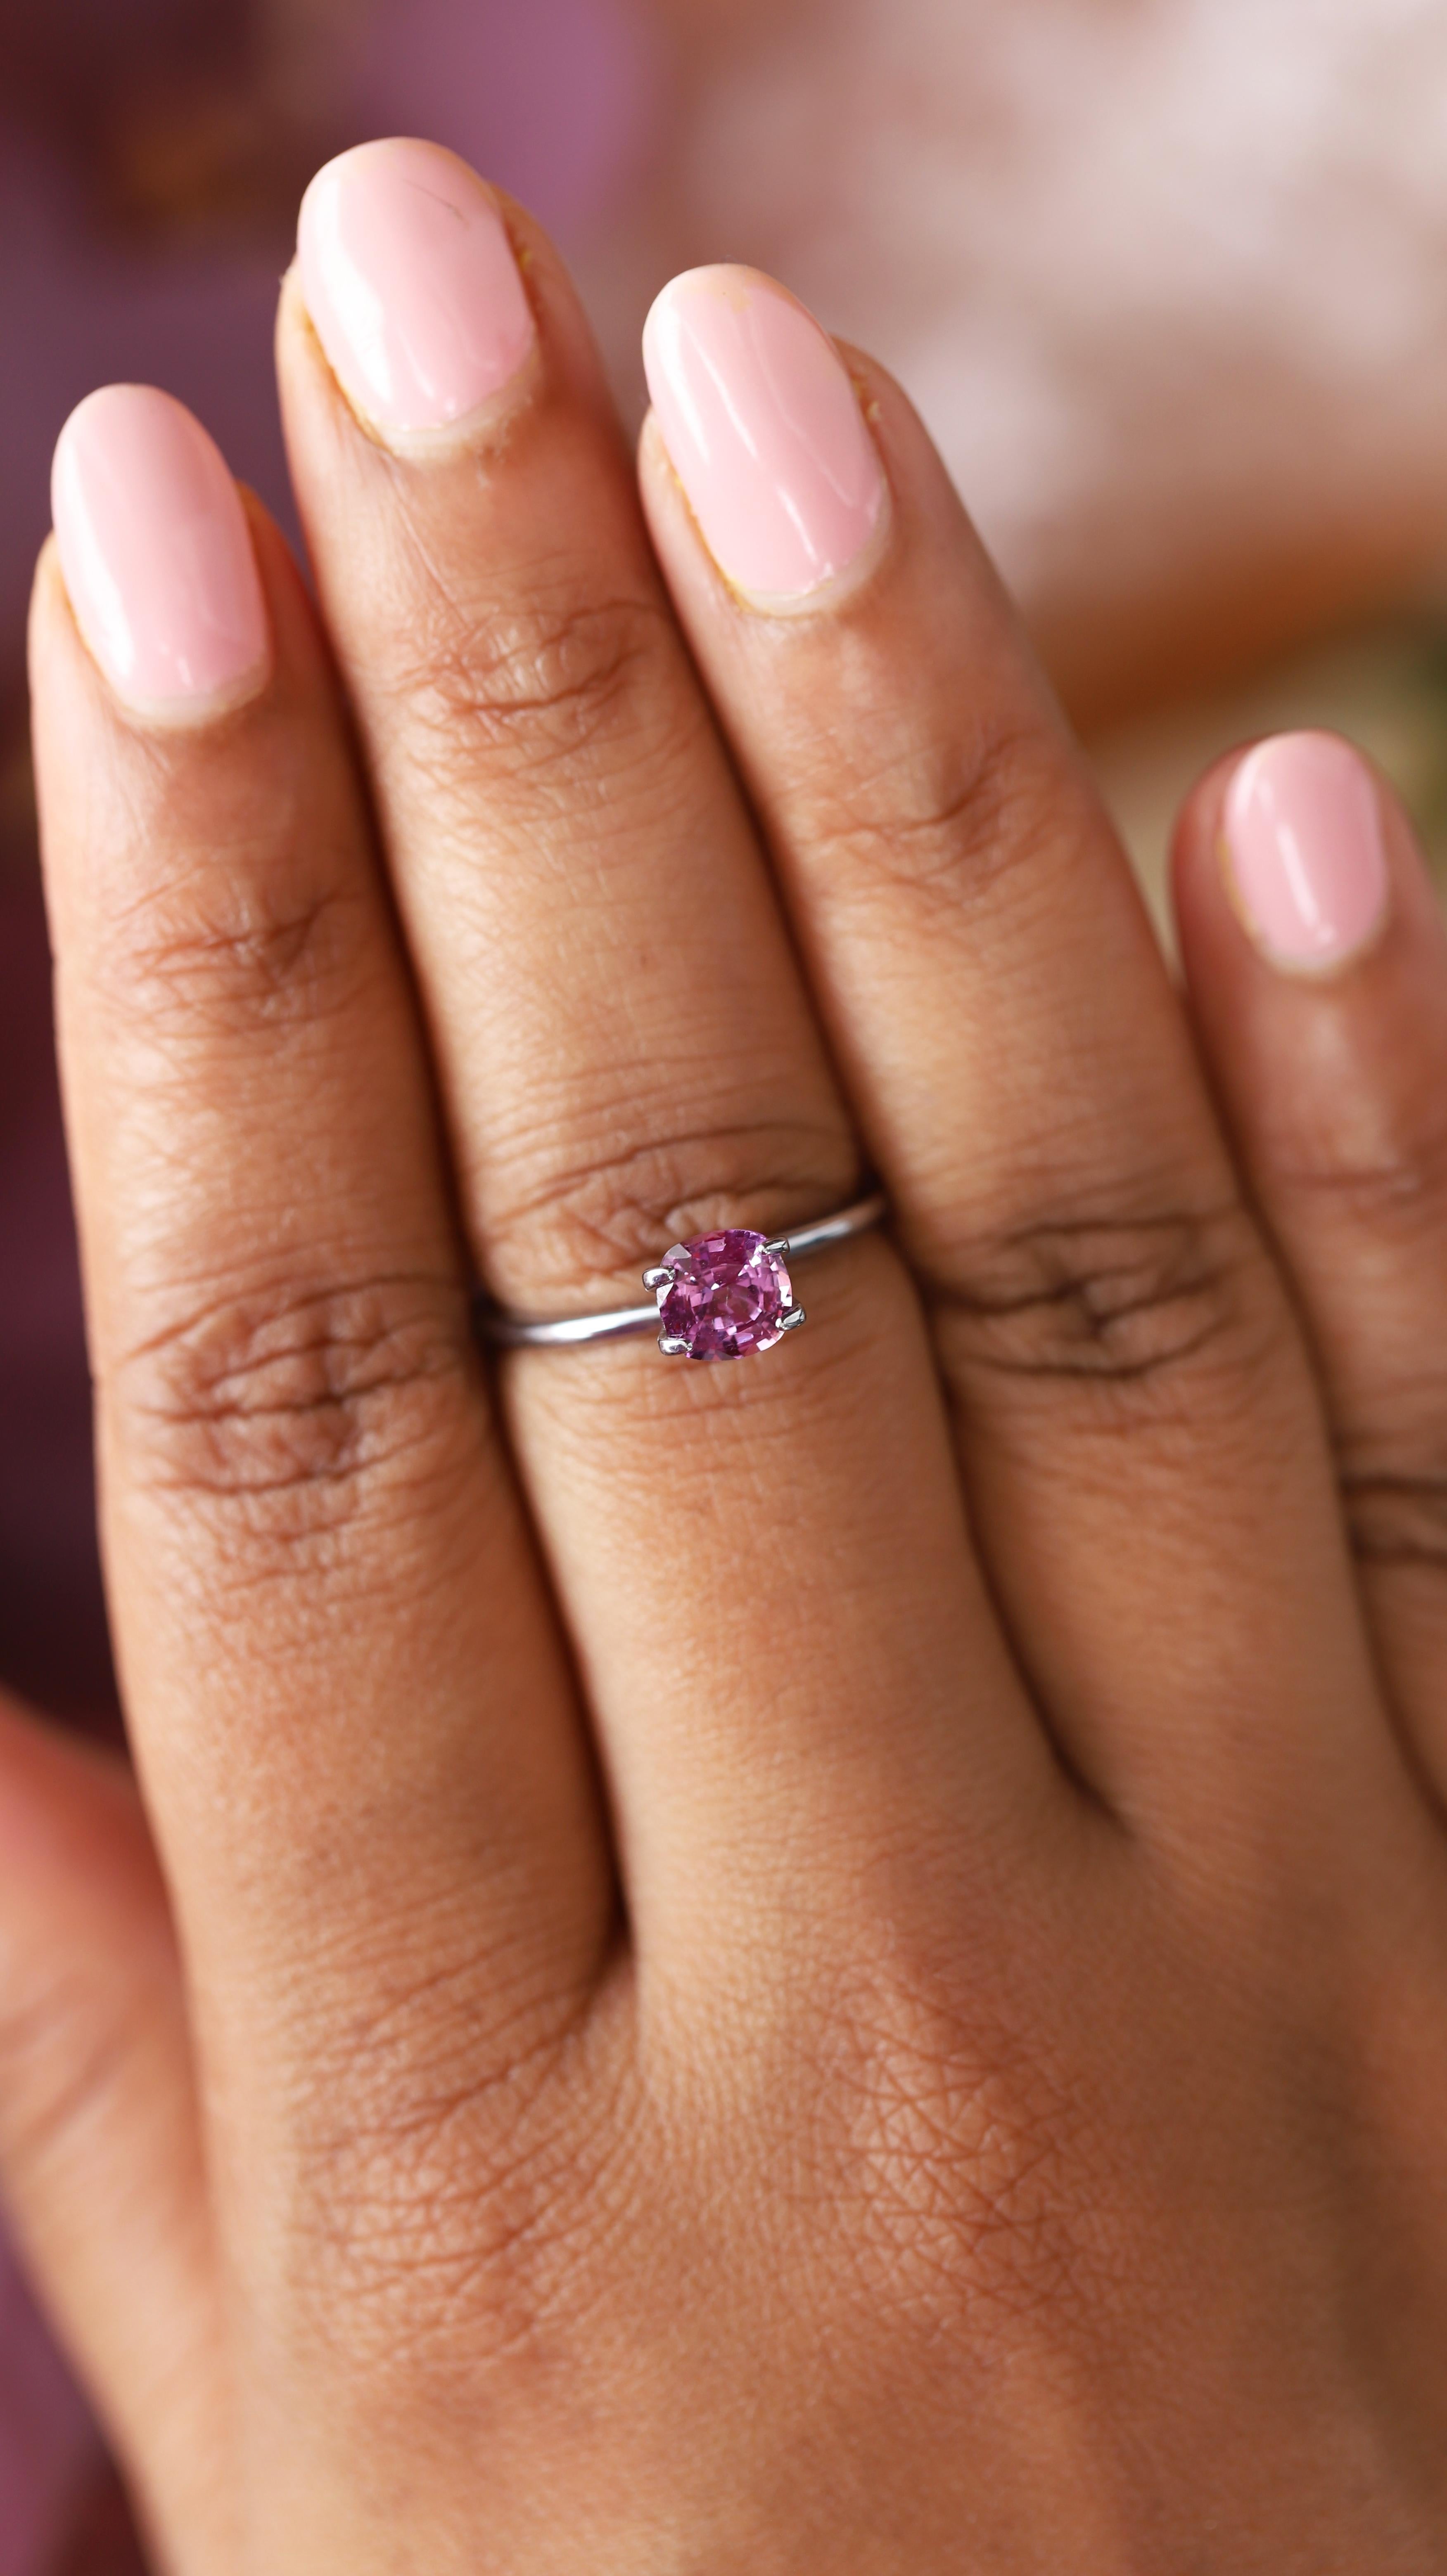 In a fascinating fusion of pink and purple, this natural sapphire is the color of cherished orchid blossoms, displaying a predominantly purplish hue with subtle pink undertones - unique and hypnotic! The gem’s clarity is impeccable, a rare and